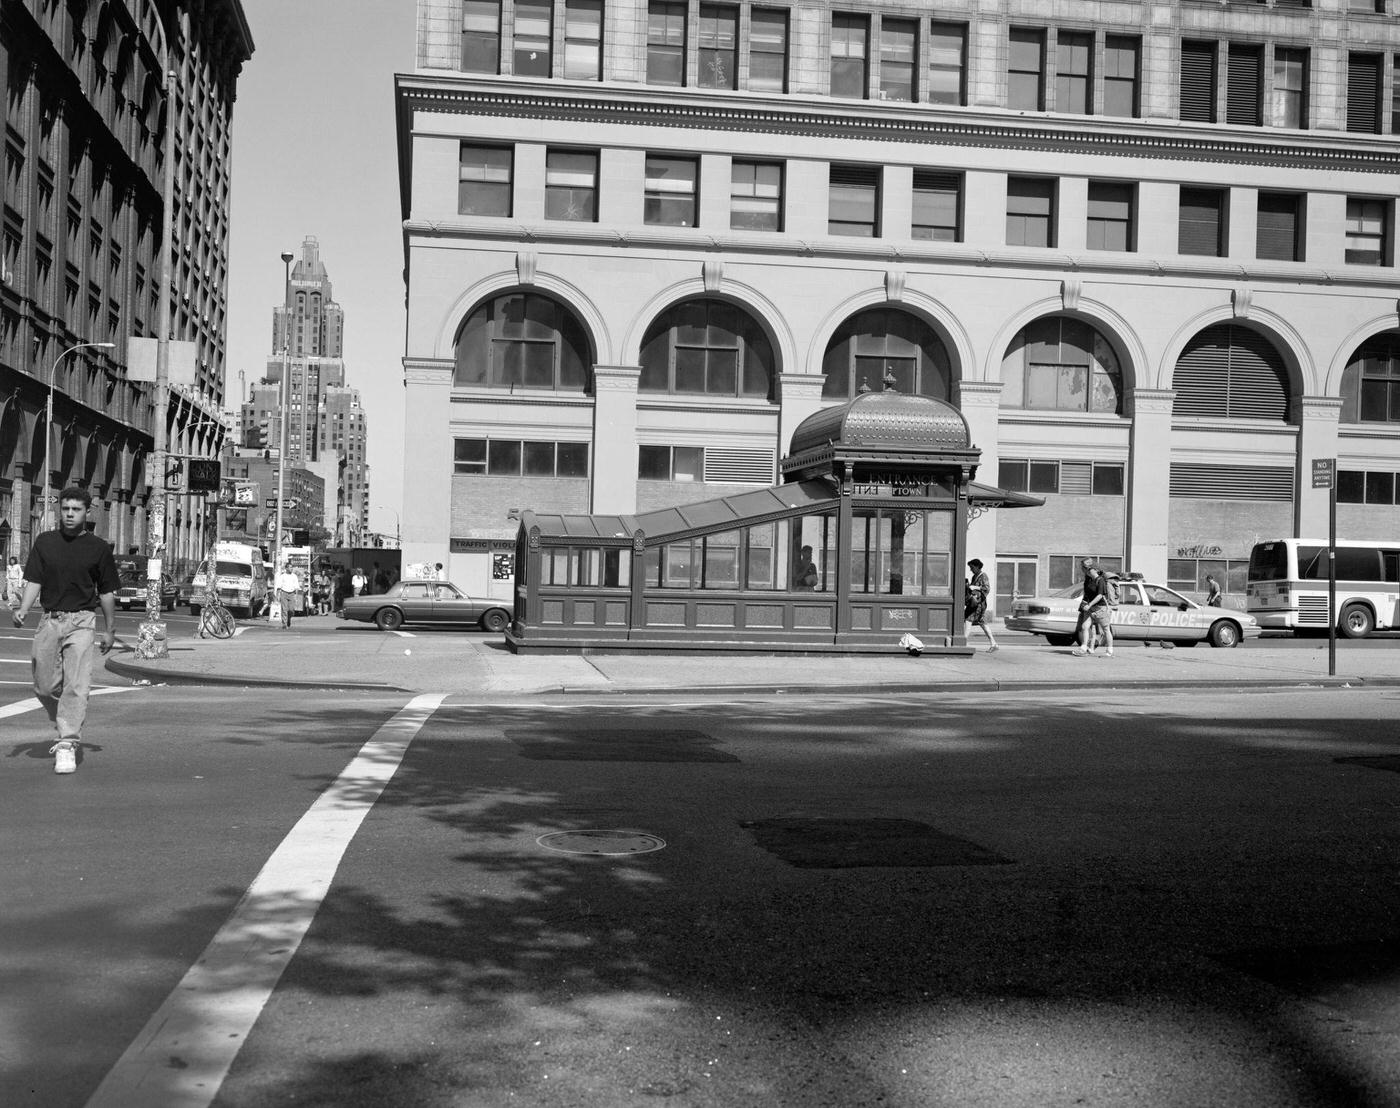 View Of The Astor Place Subway Kiosk, Manhattan, 1990